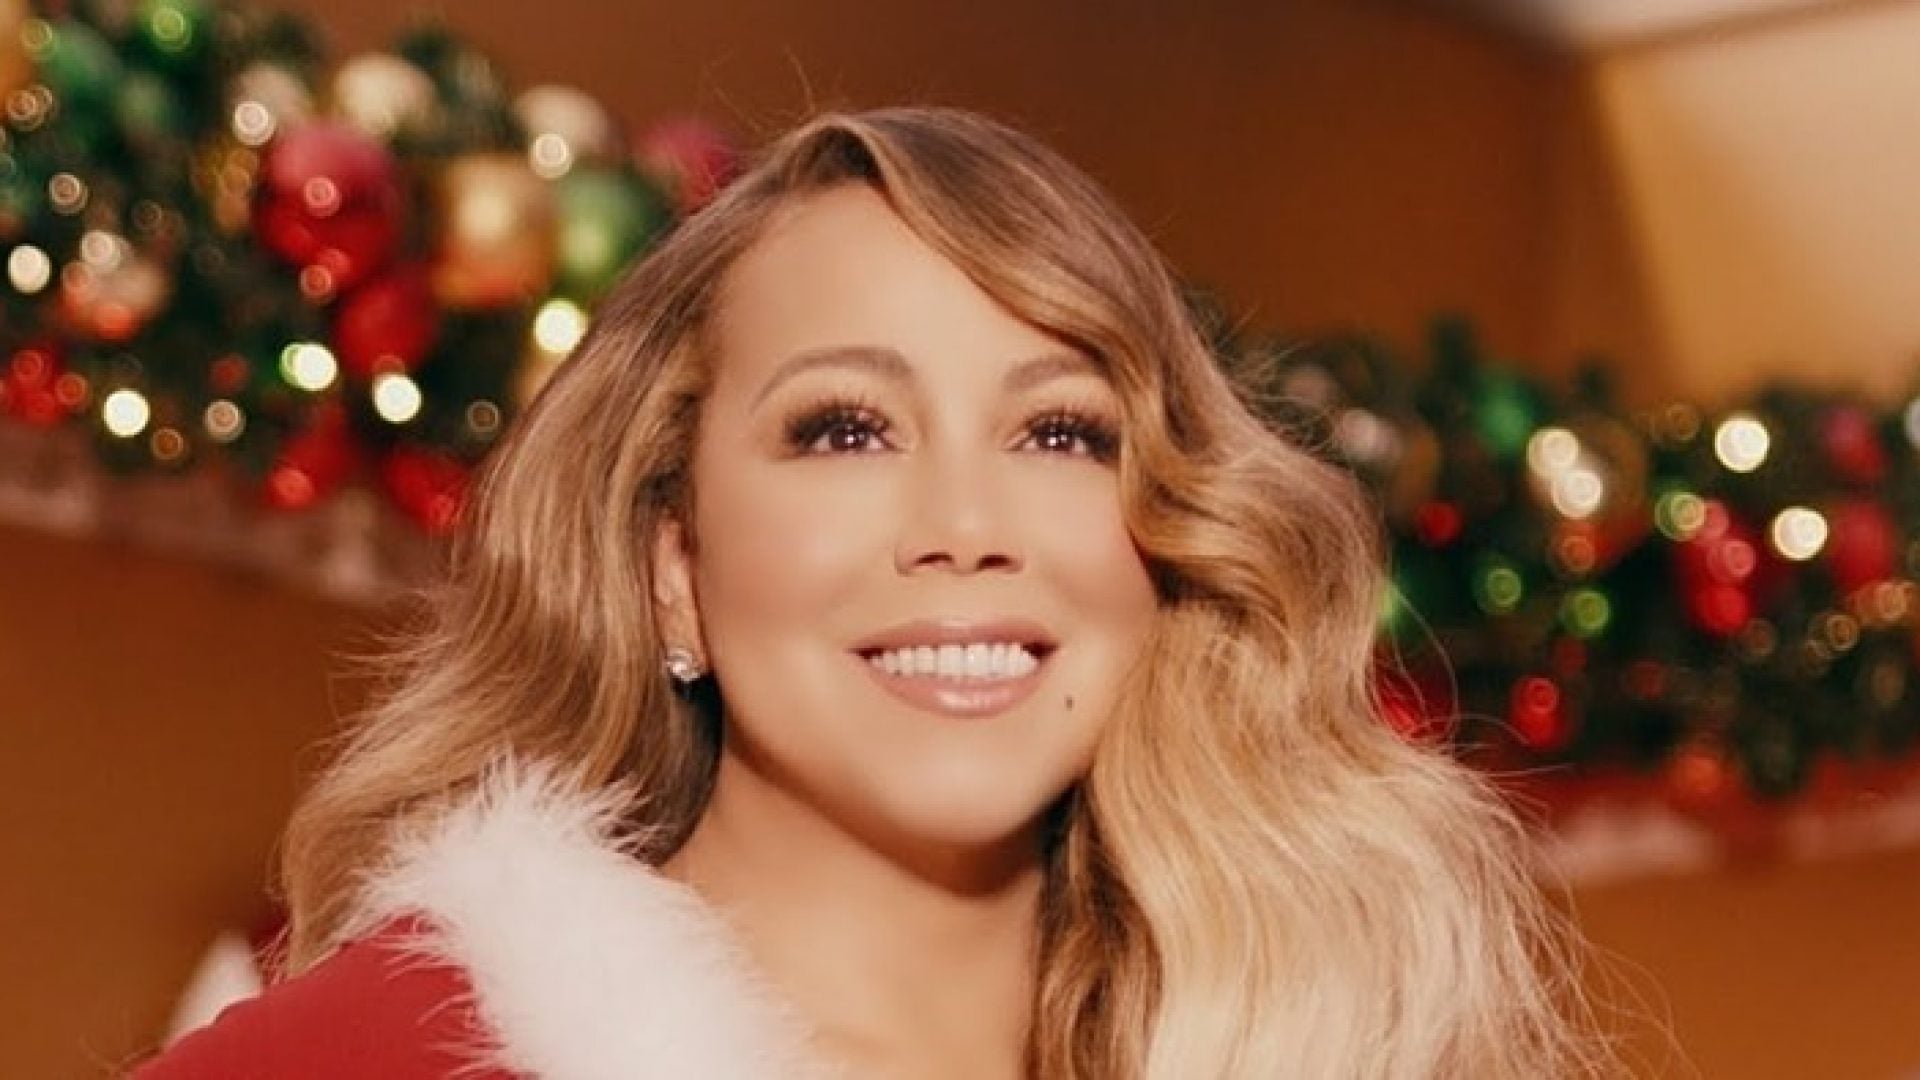 Mariah Carey's New Video For 'All I Want For Christmas Is You' Is